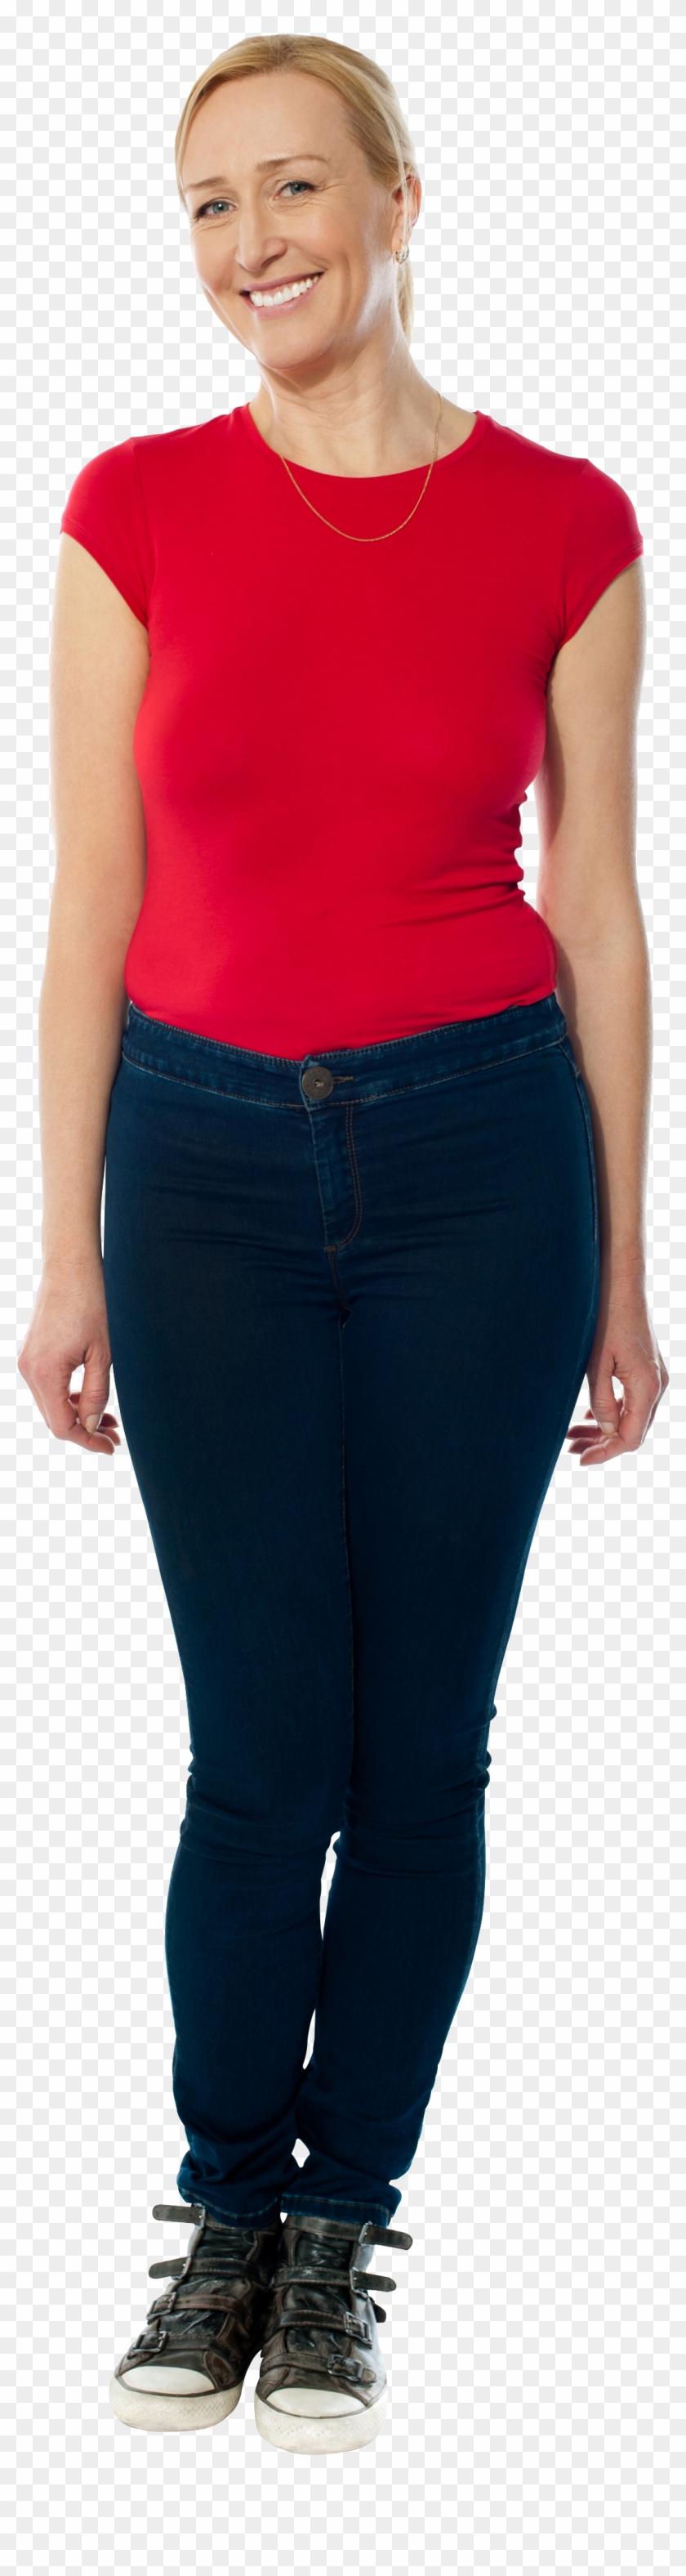 Standing Women Png Image - Woman Standing Png Clipart #182653